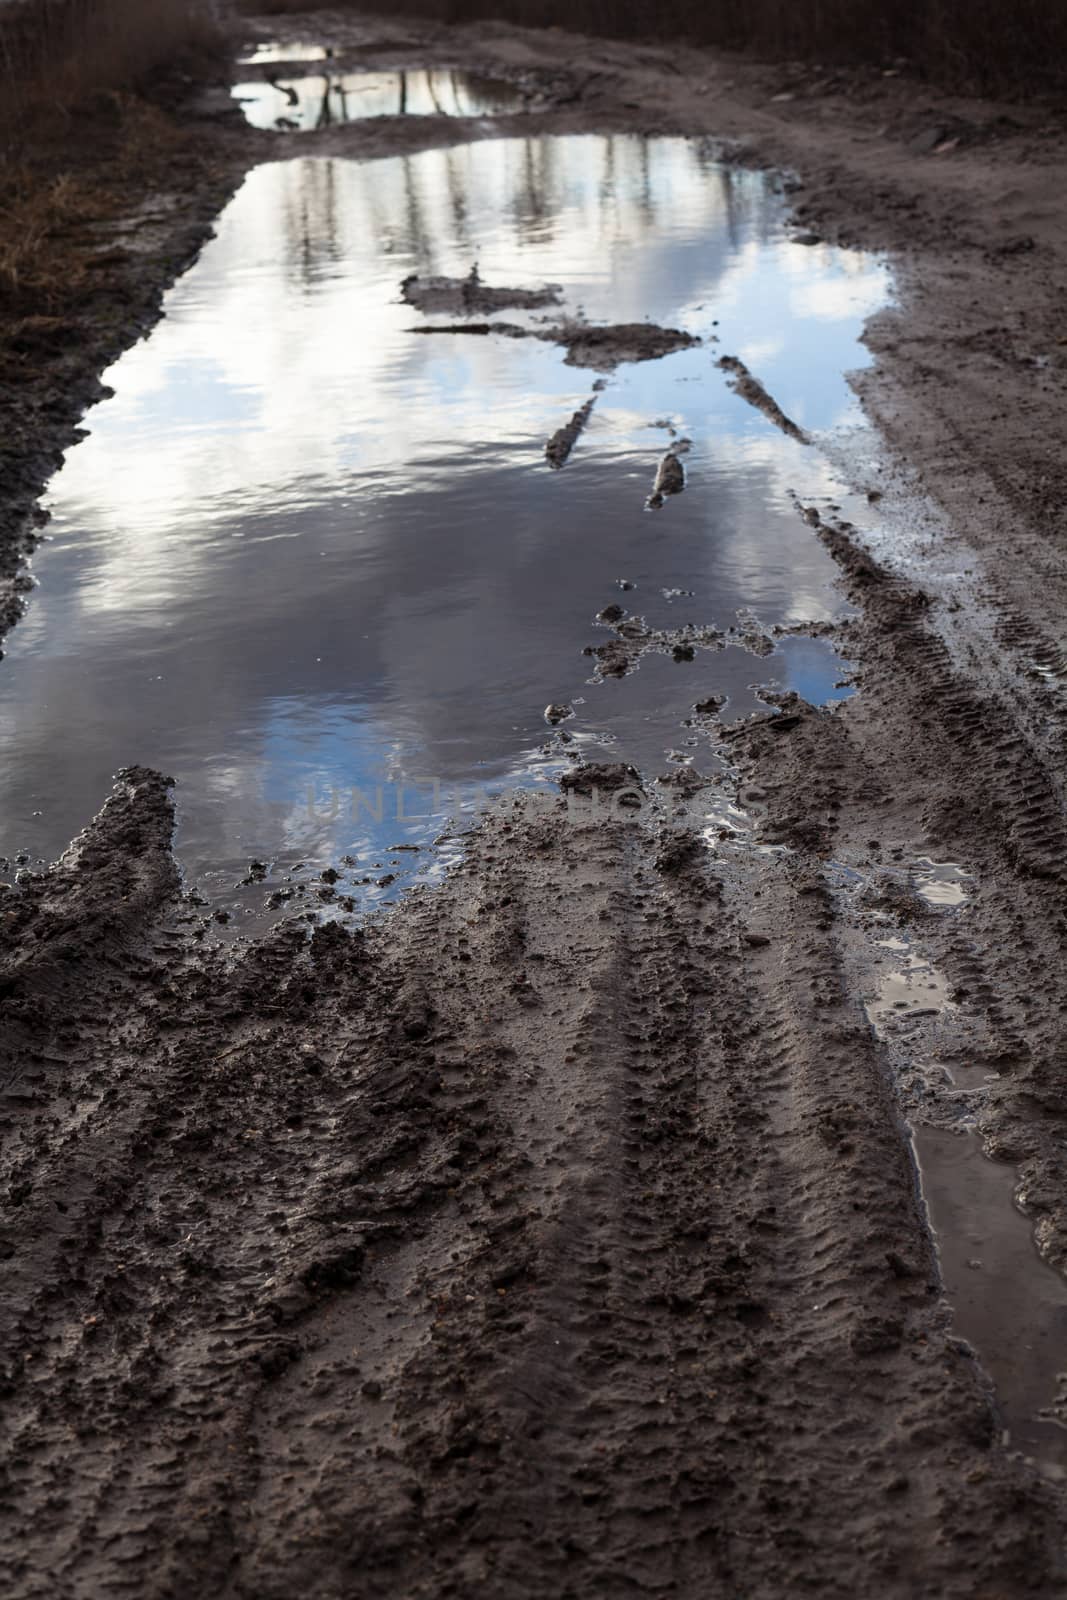 Mud and puddles on the dirt road by rootstocks